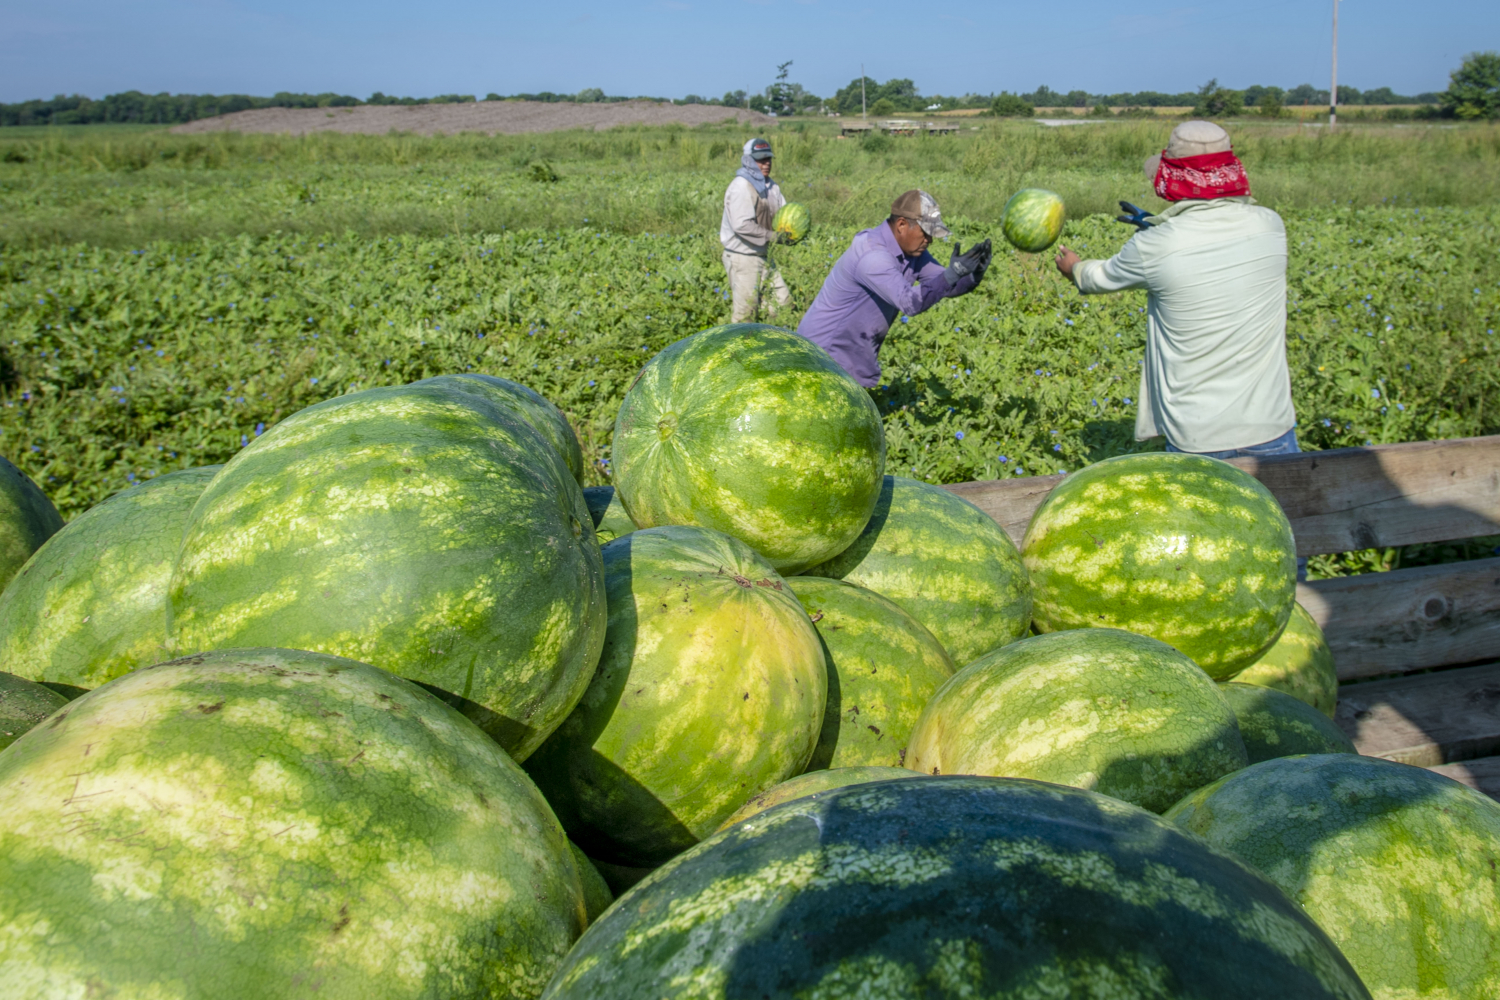 pests and diseases that affect watermelon farming in kenya